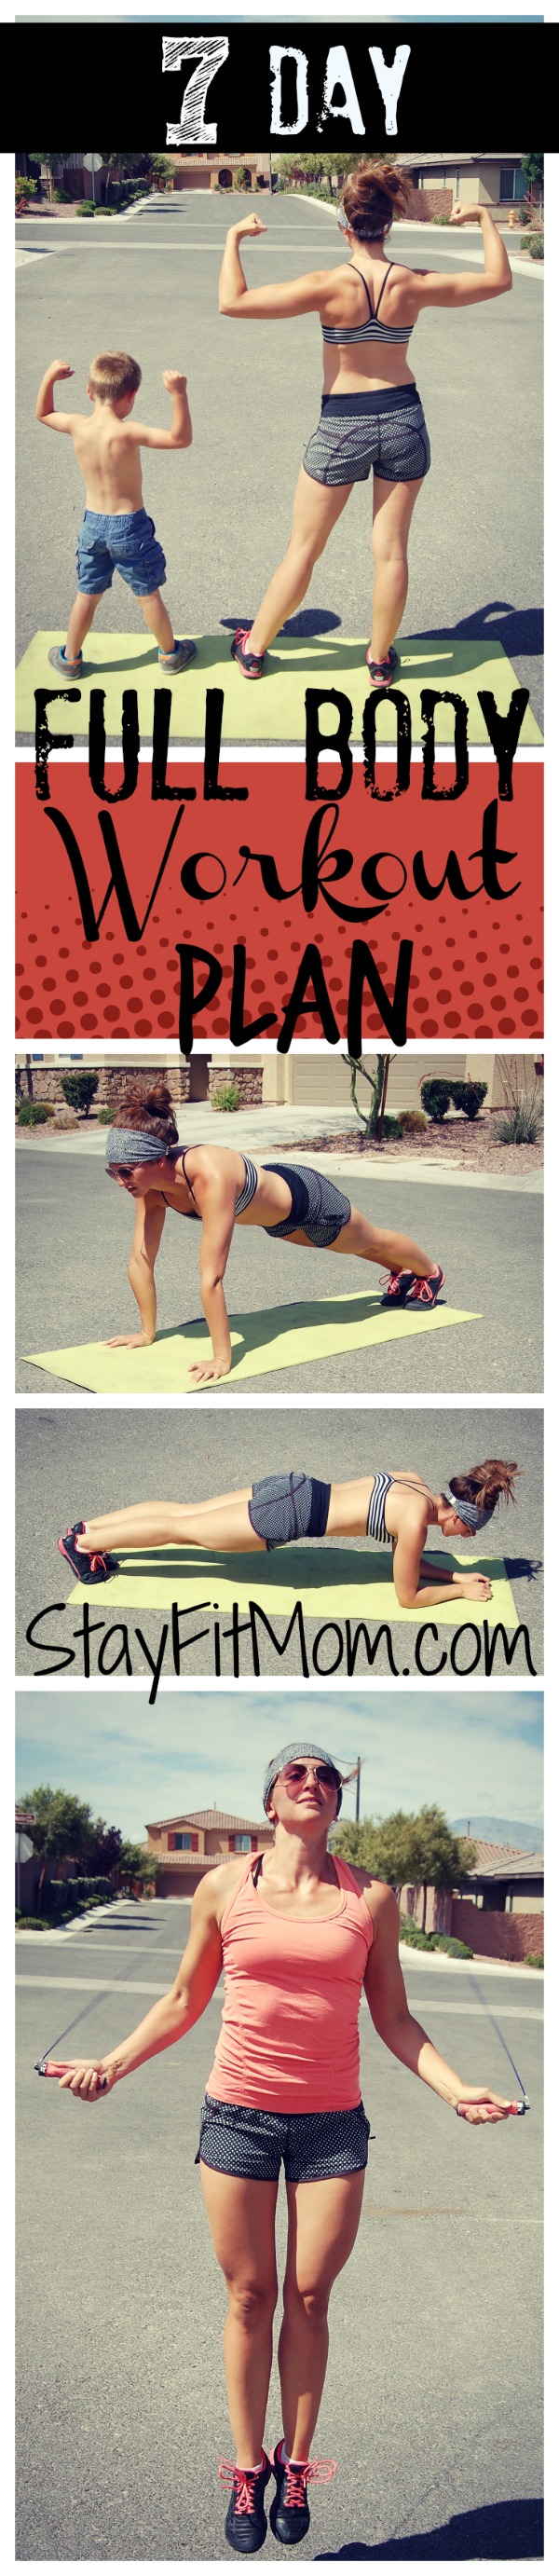 I've got to try this at home workout plan from StayFitMom.com!